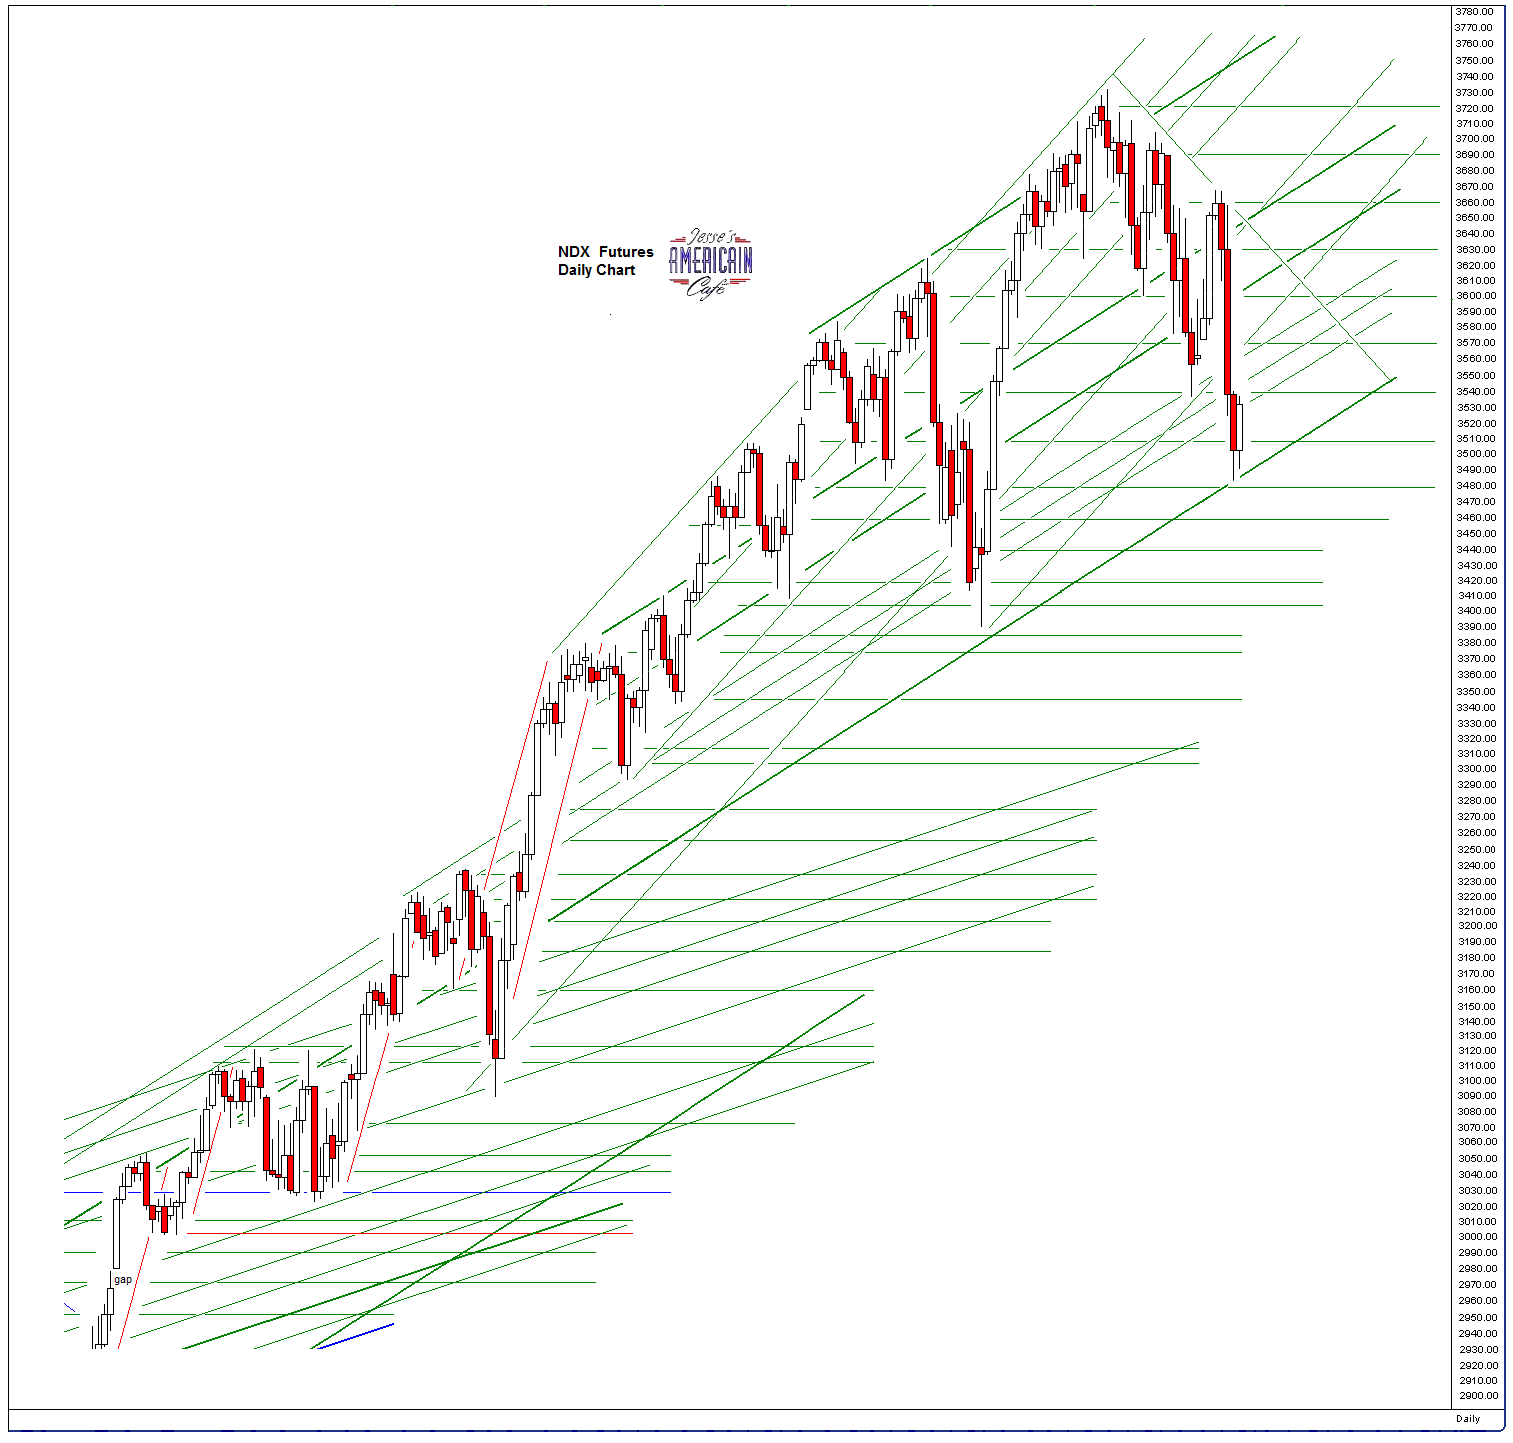 Jesse's Café Américain: SP 500 and NDX Futures Daily Charts - Bounce Off the Trendline1513 x 1443